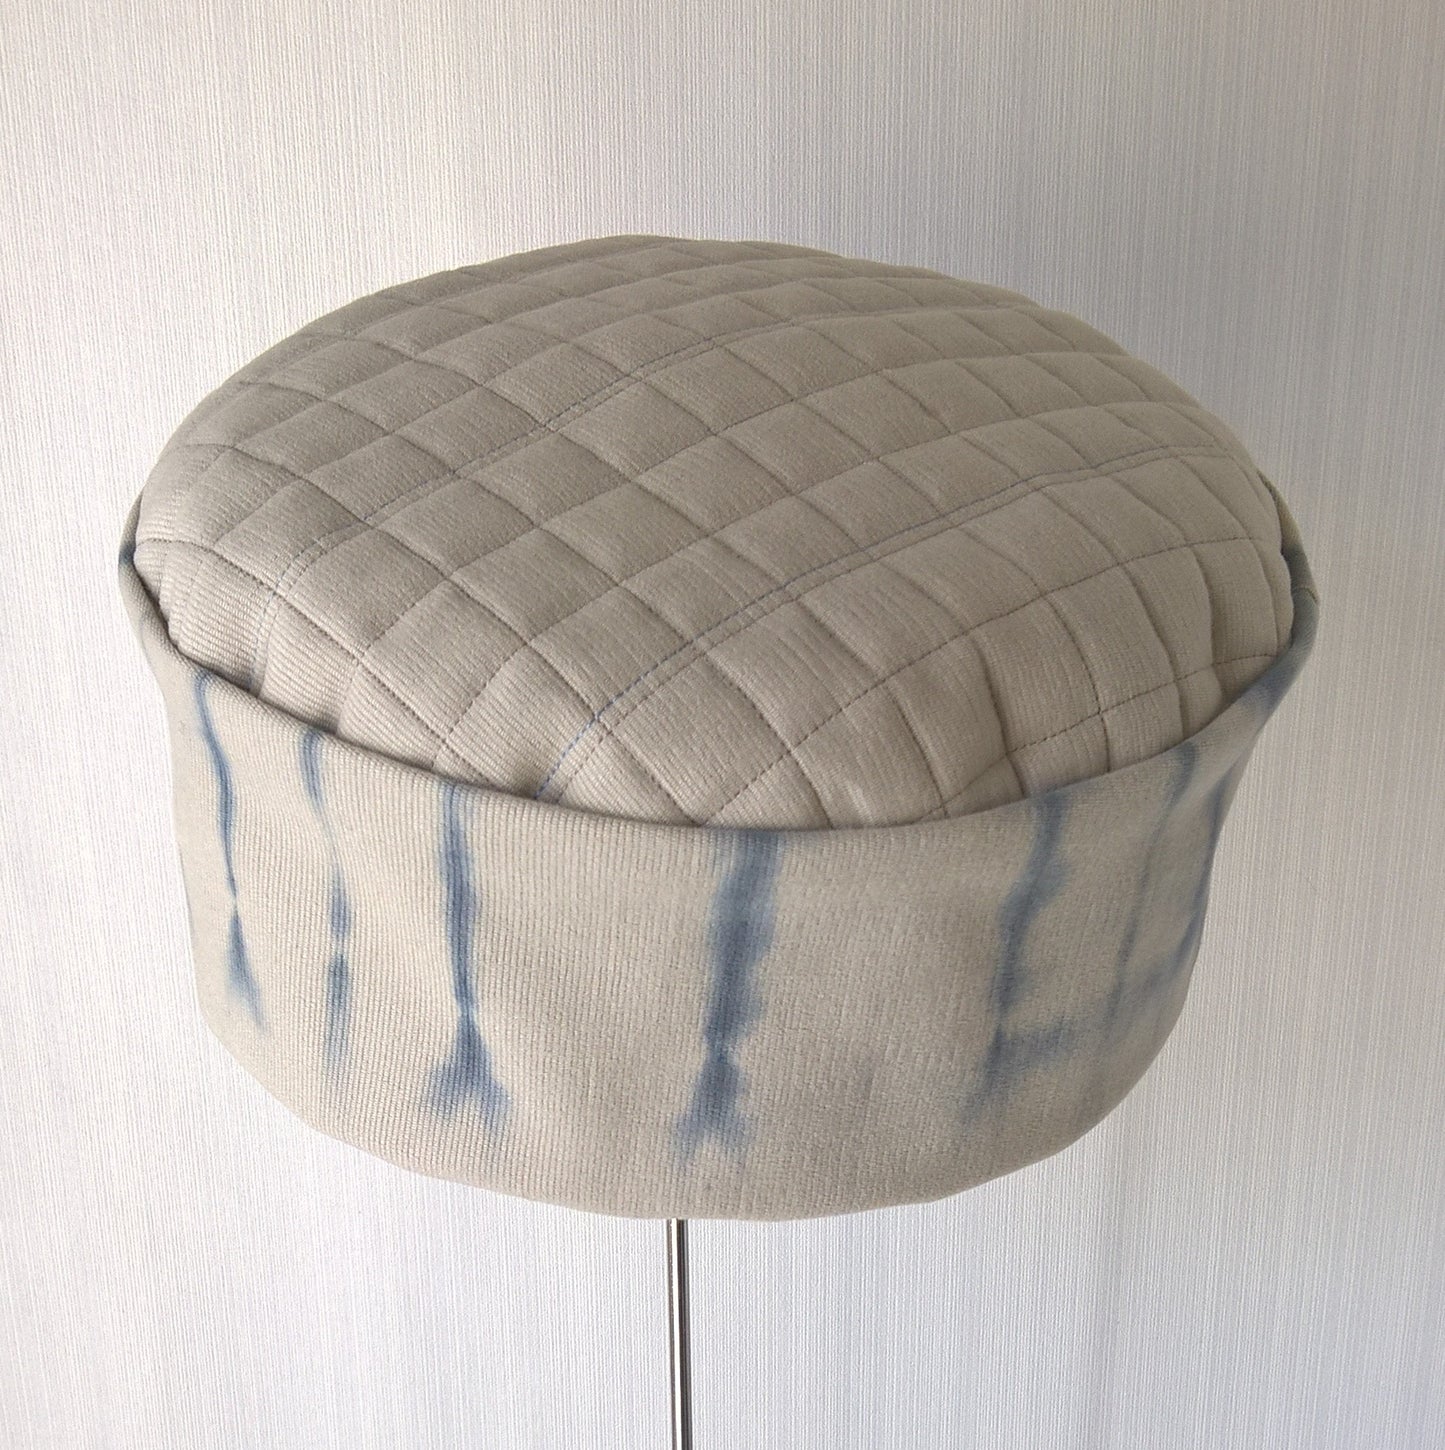 Pillbox shaped hat with quilted tip and tie dyed crown